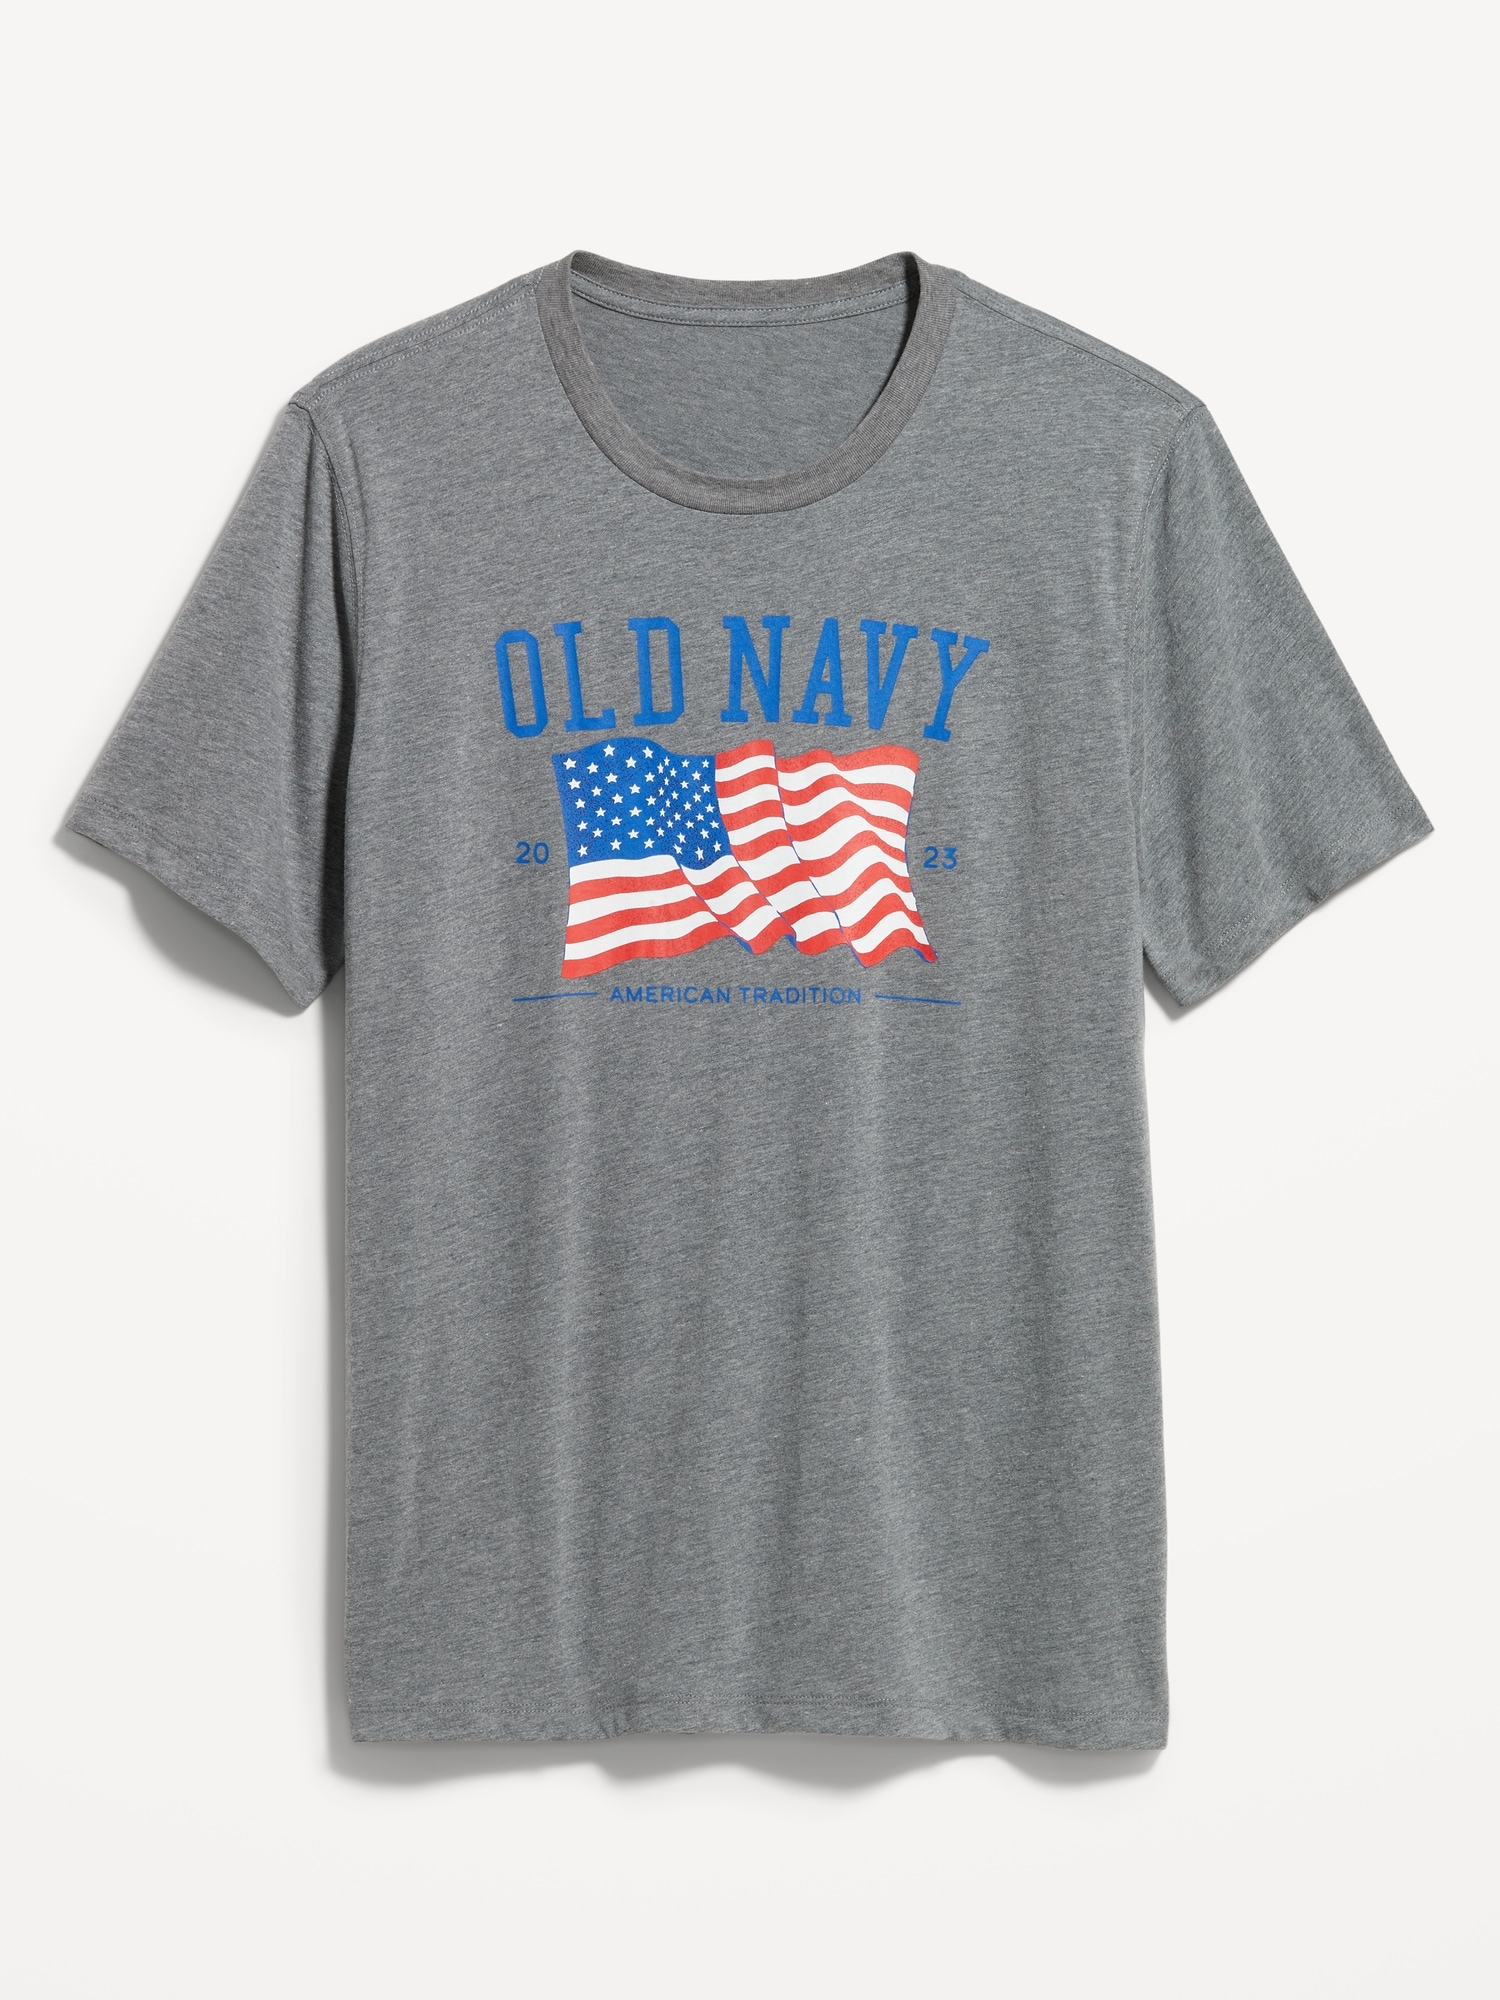 Matching "Old Navy" Flag Graphic T-Shirt